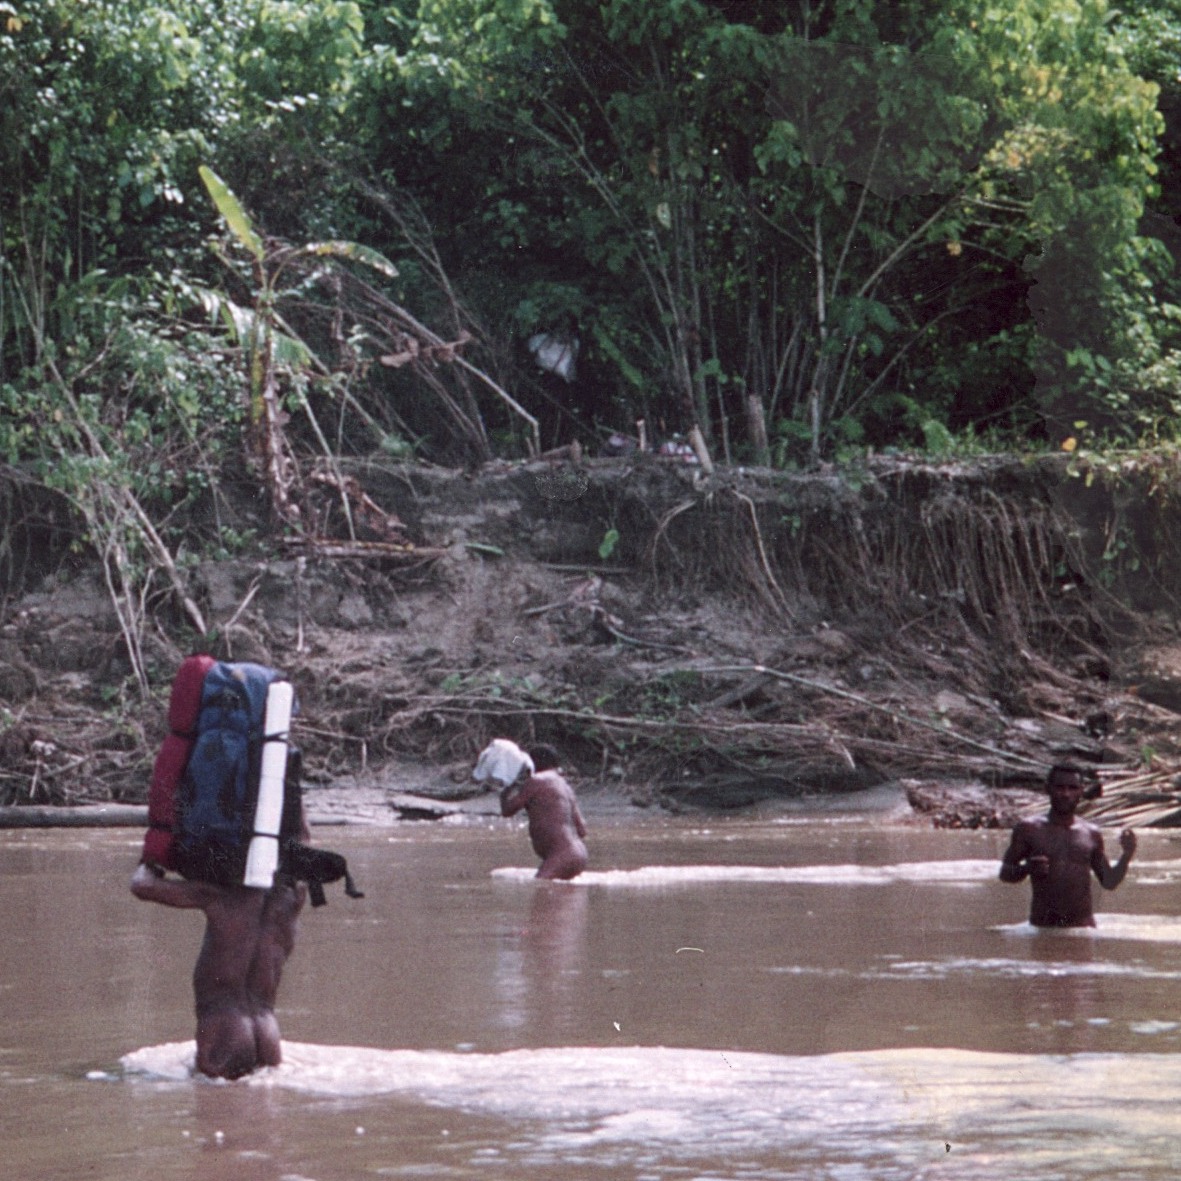 Fording A River Carrying Bags, Field Collecting Museum-quality Oceanic Art